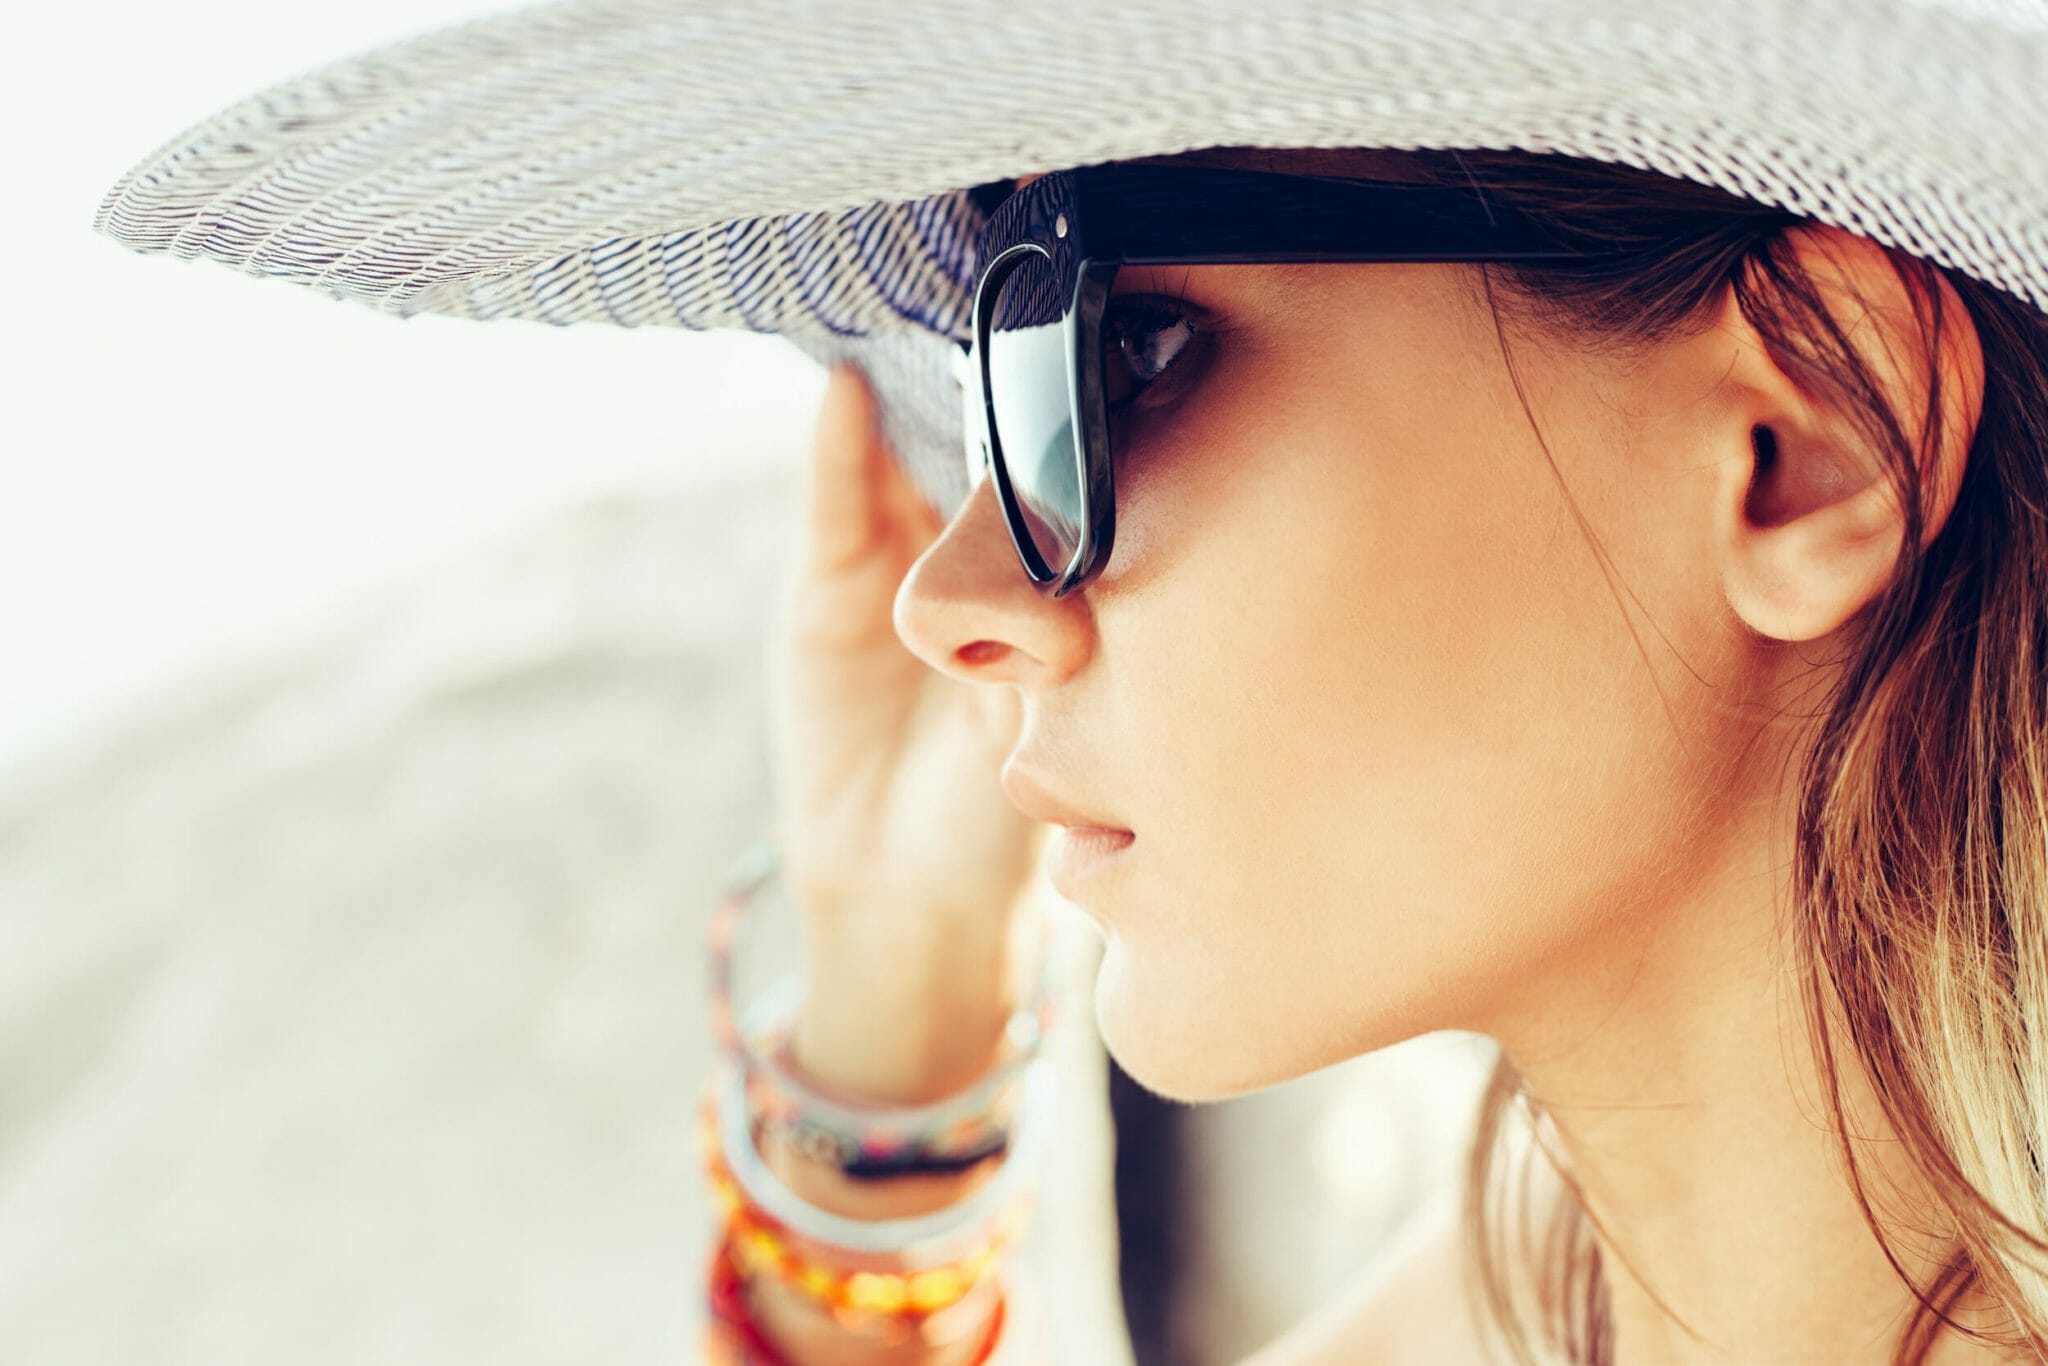 Face of young woman wearing hat and sunglasses